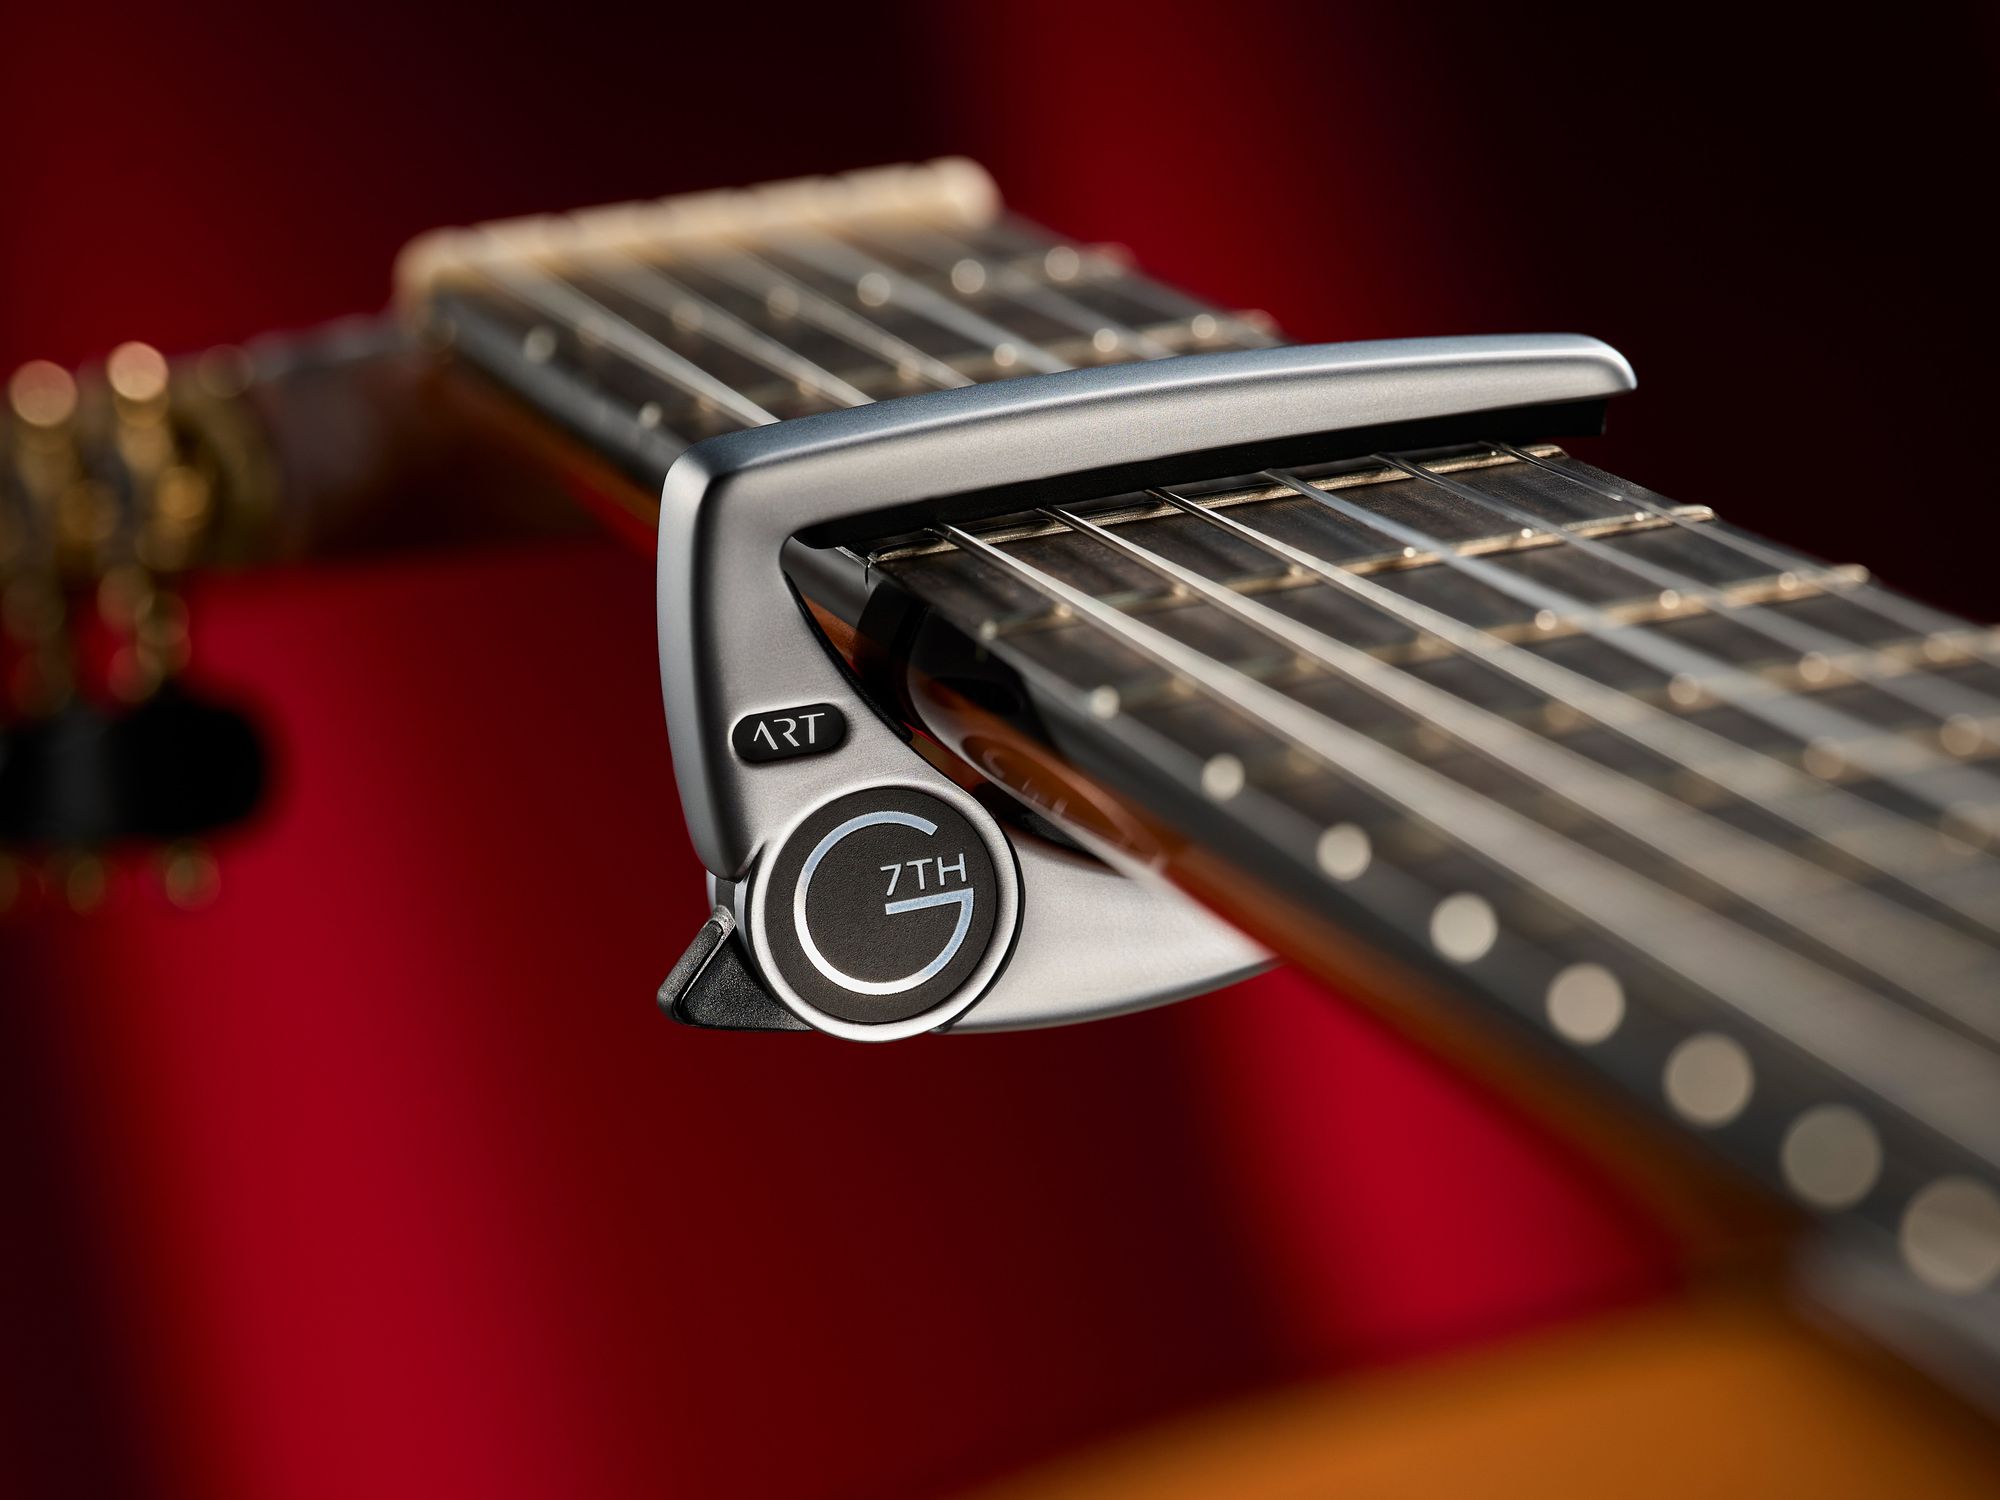 G7th Introduces the Performance 3 Capo